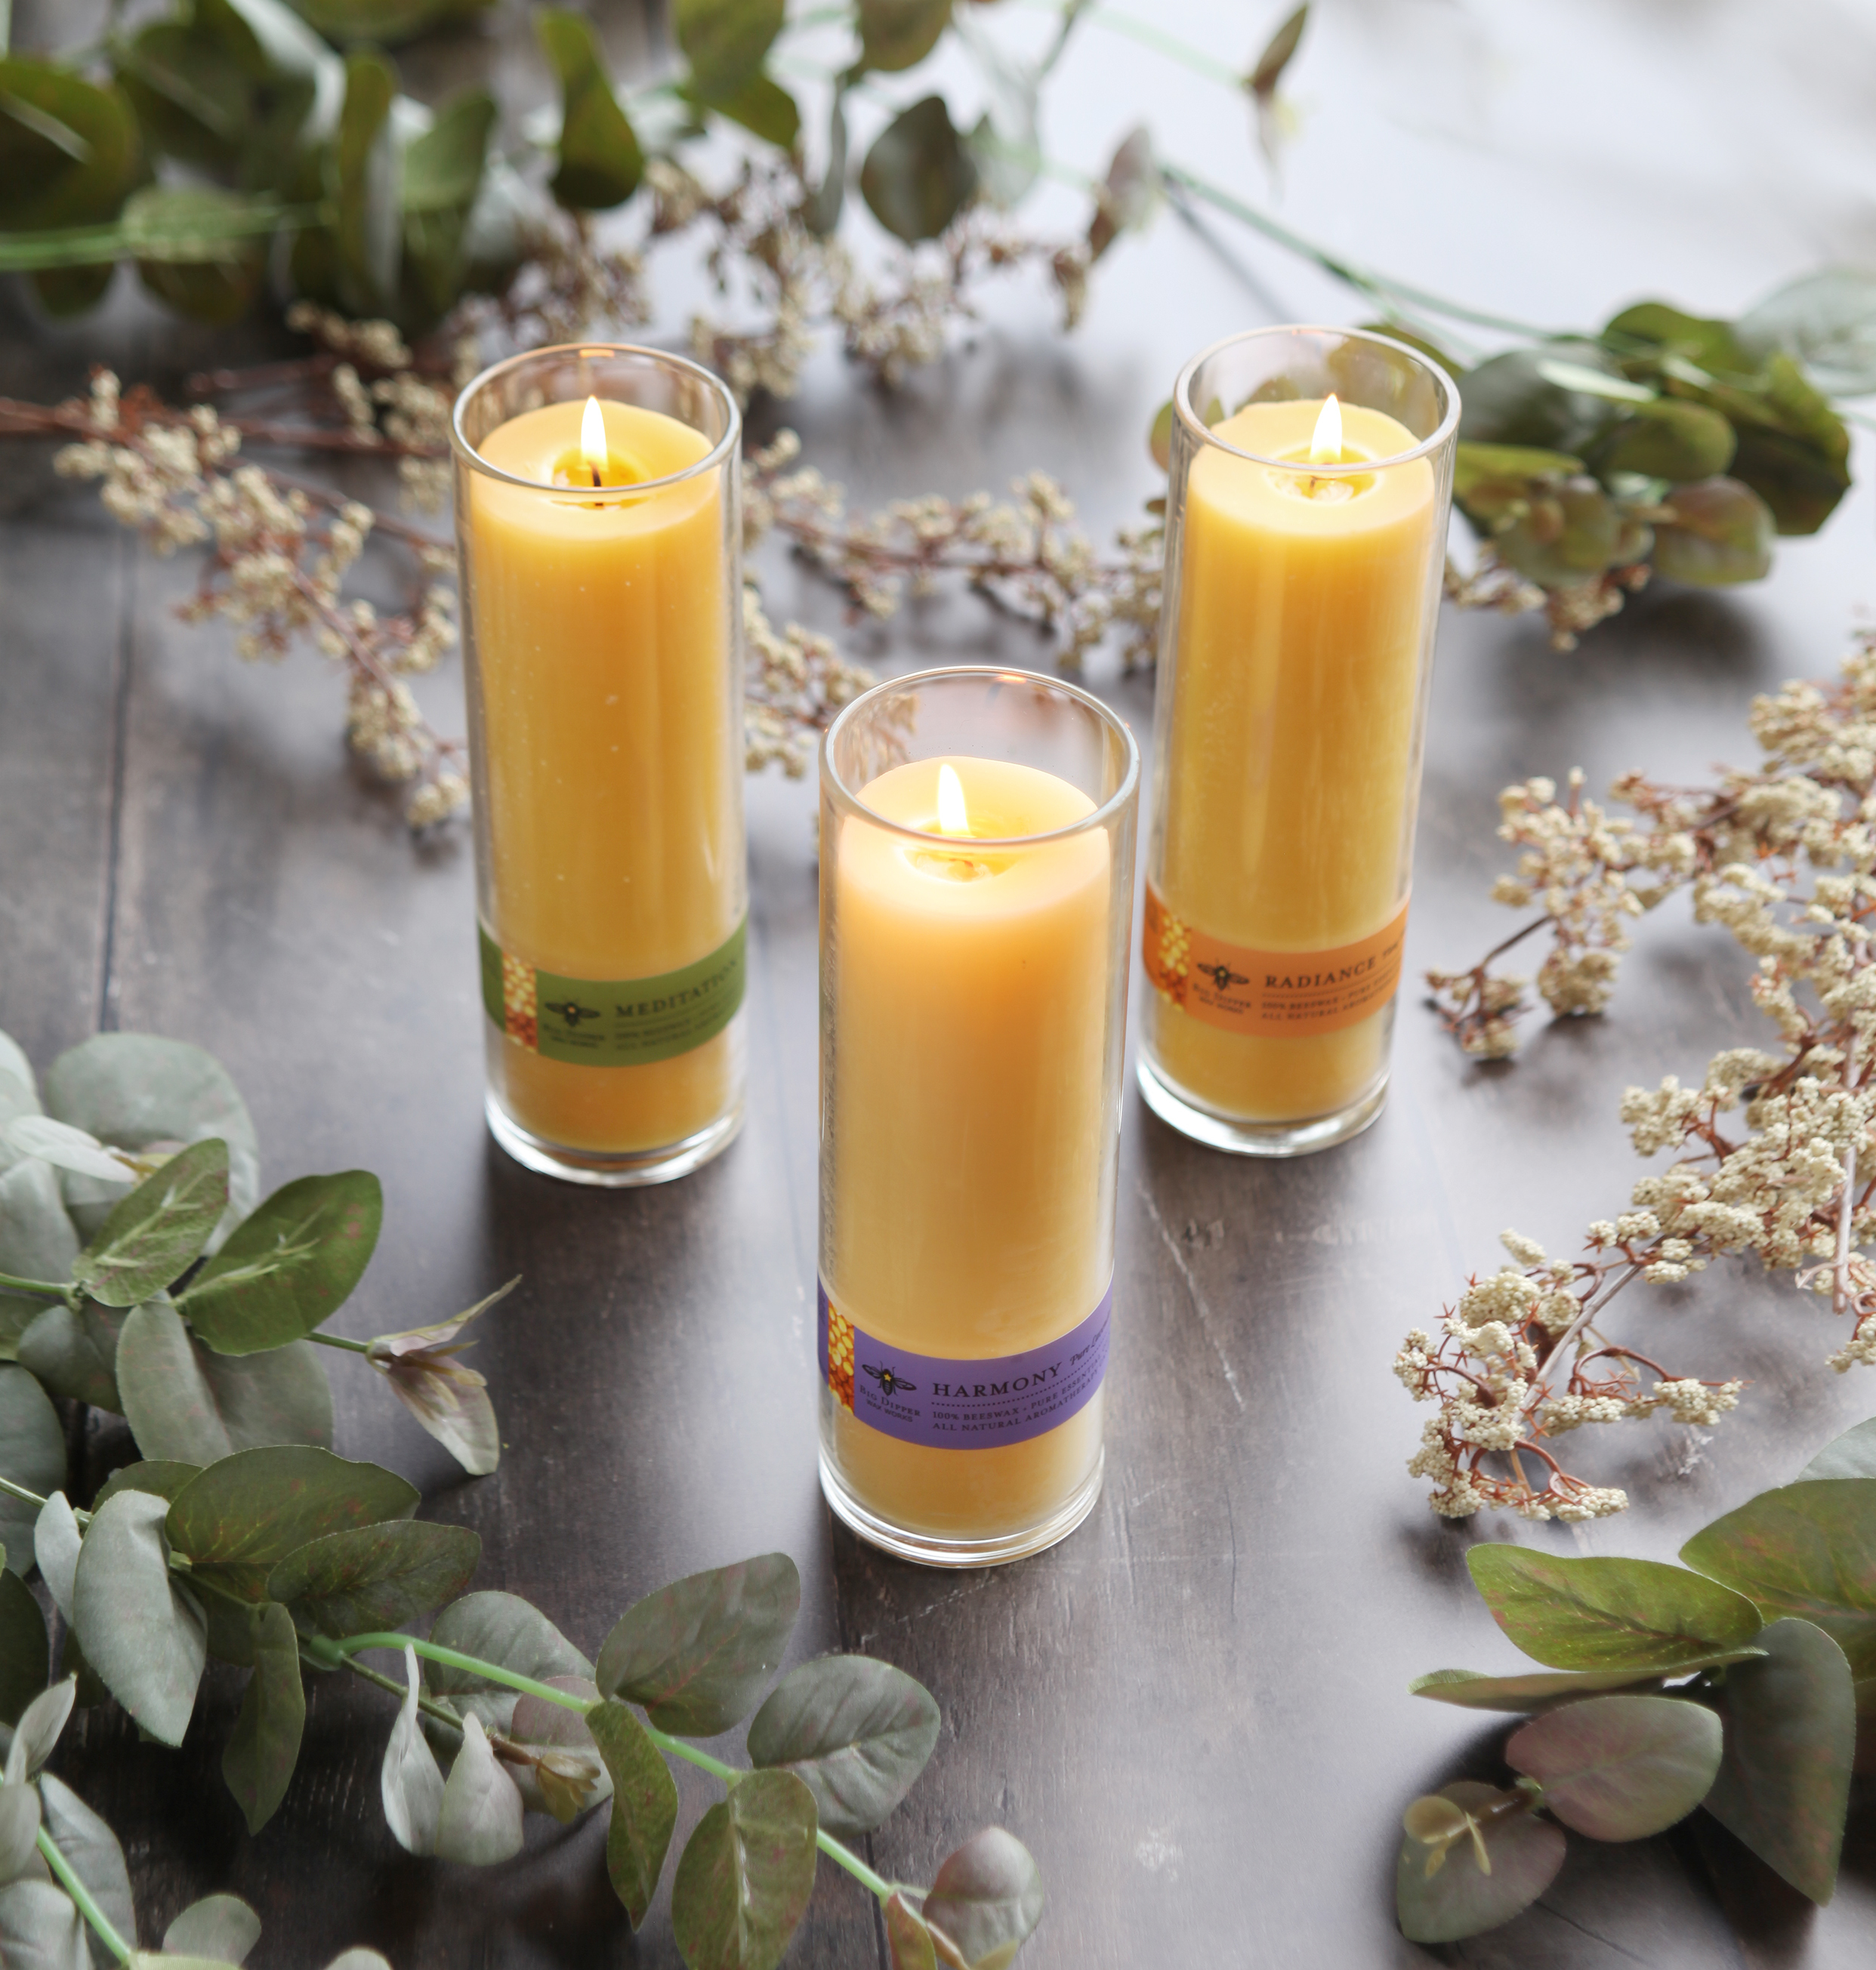 Beautiful votive candles with their wicks on prominent display